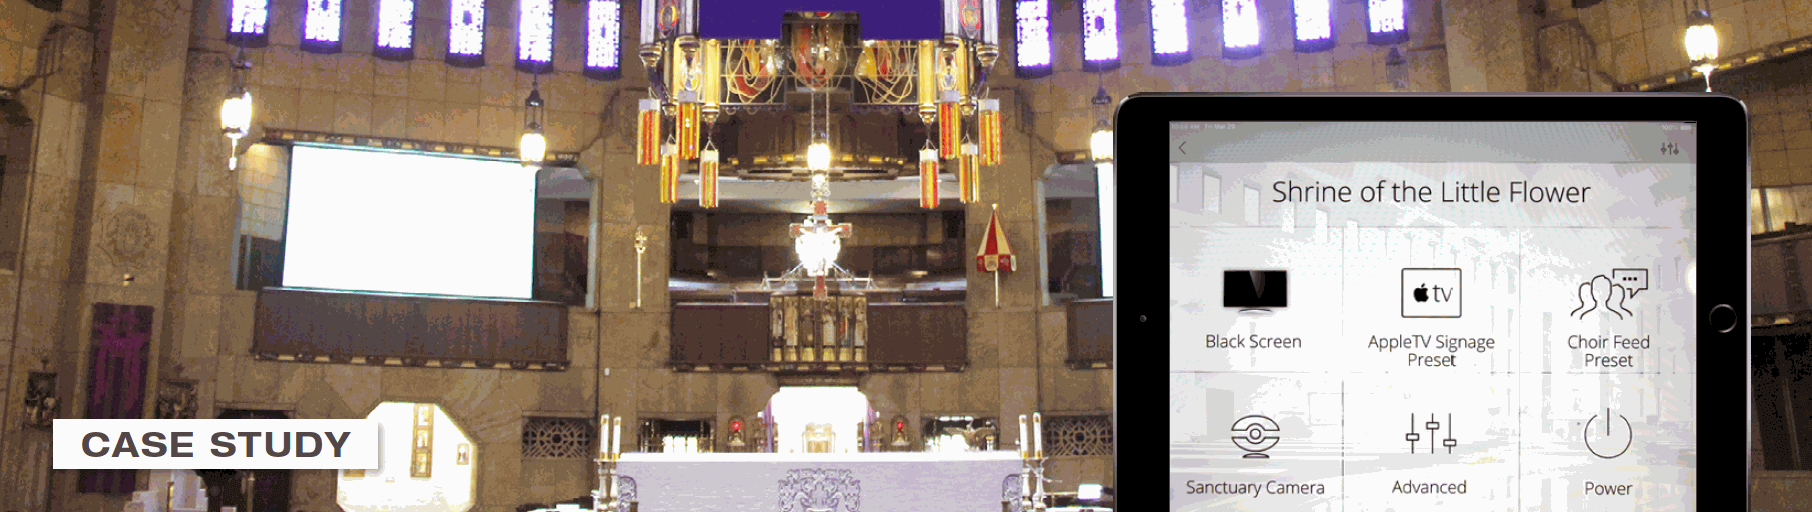 National Shrine Transformation Customer Case Study Key Digital's AV over IP System and Compass Control® Pro Elevate Benefits and Enhance Experiences.